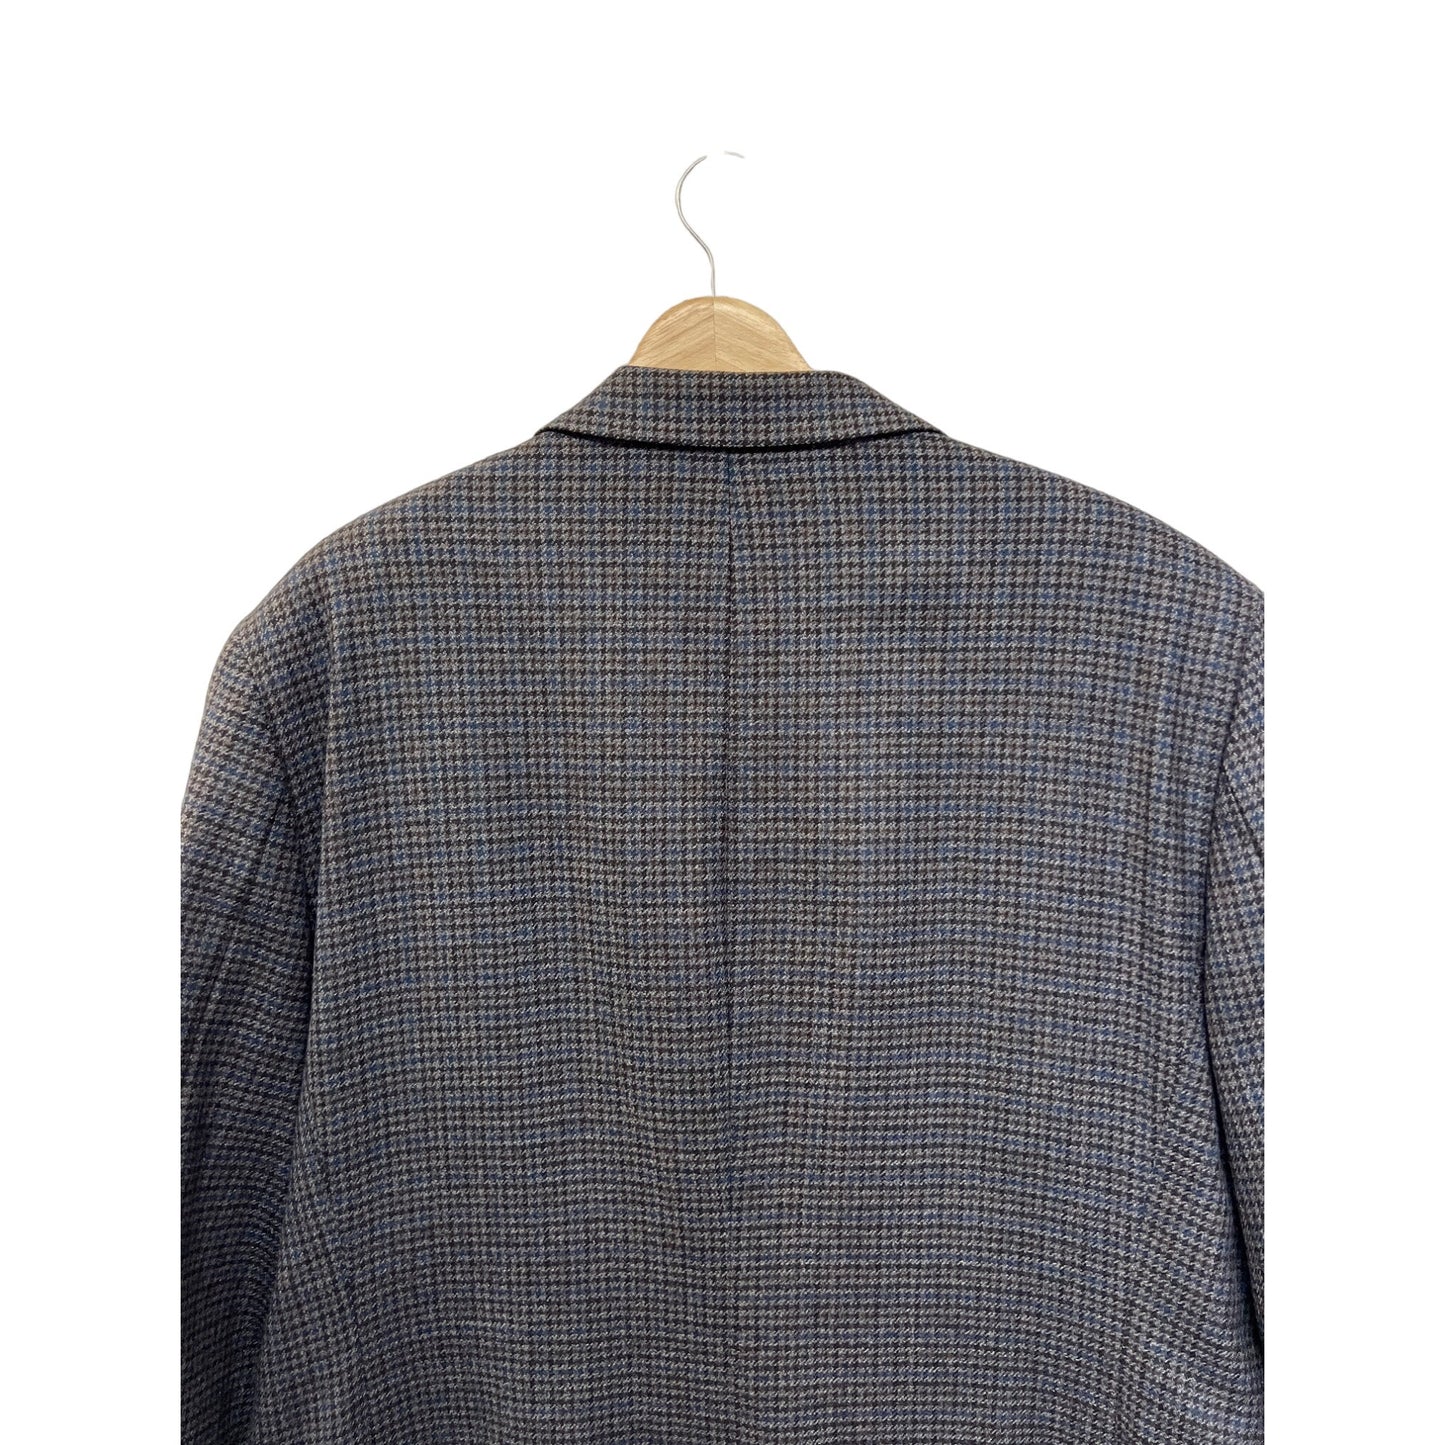 Chaps Gray and Navy Checked Lambswool Blazer